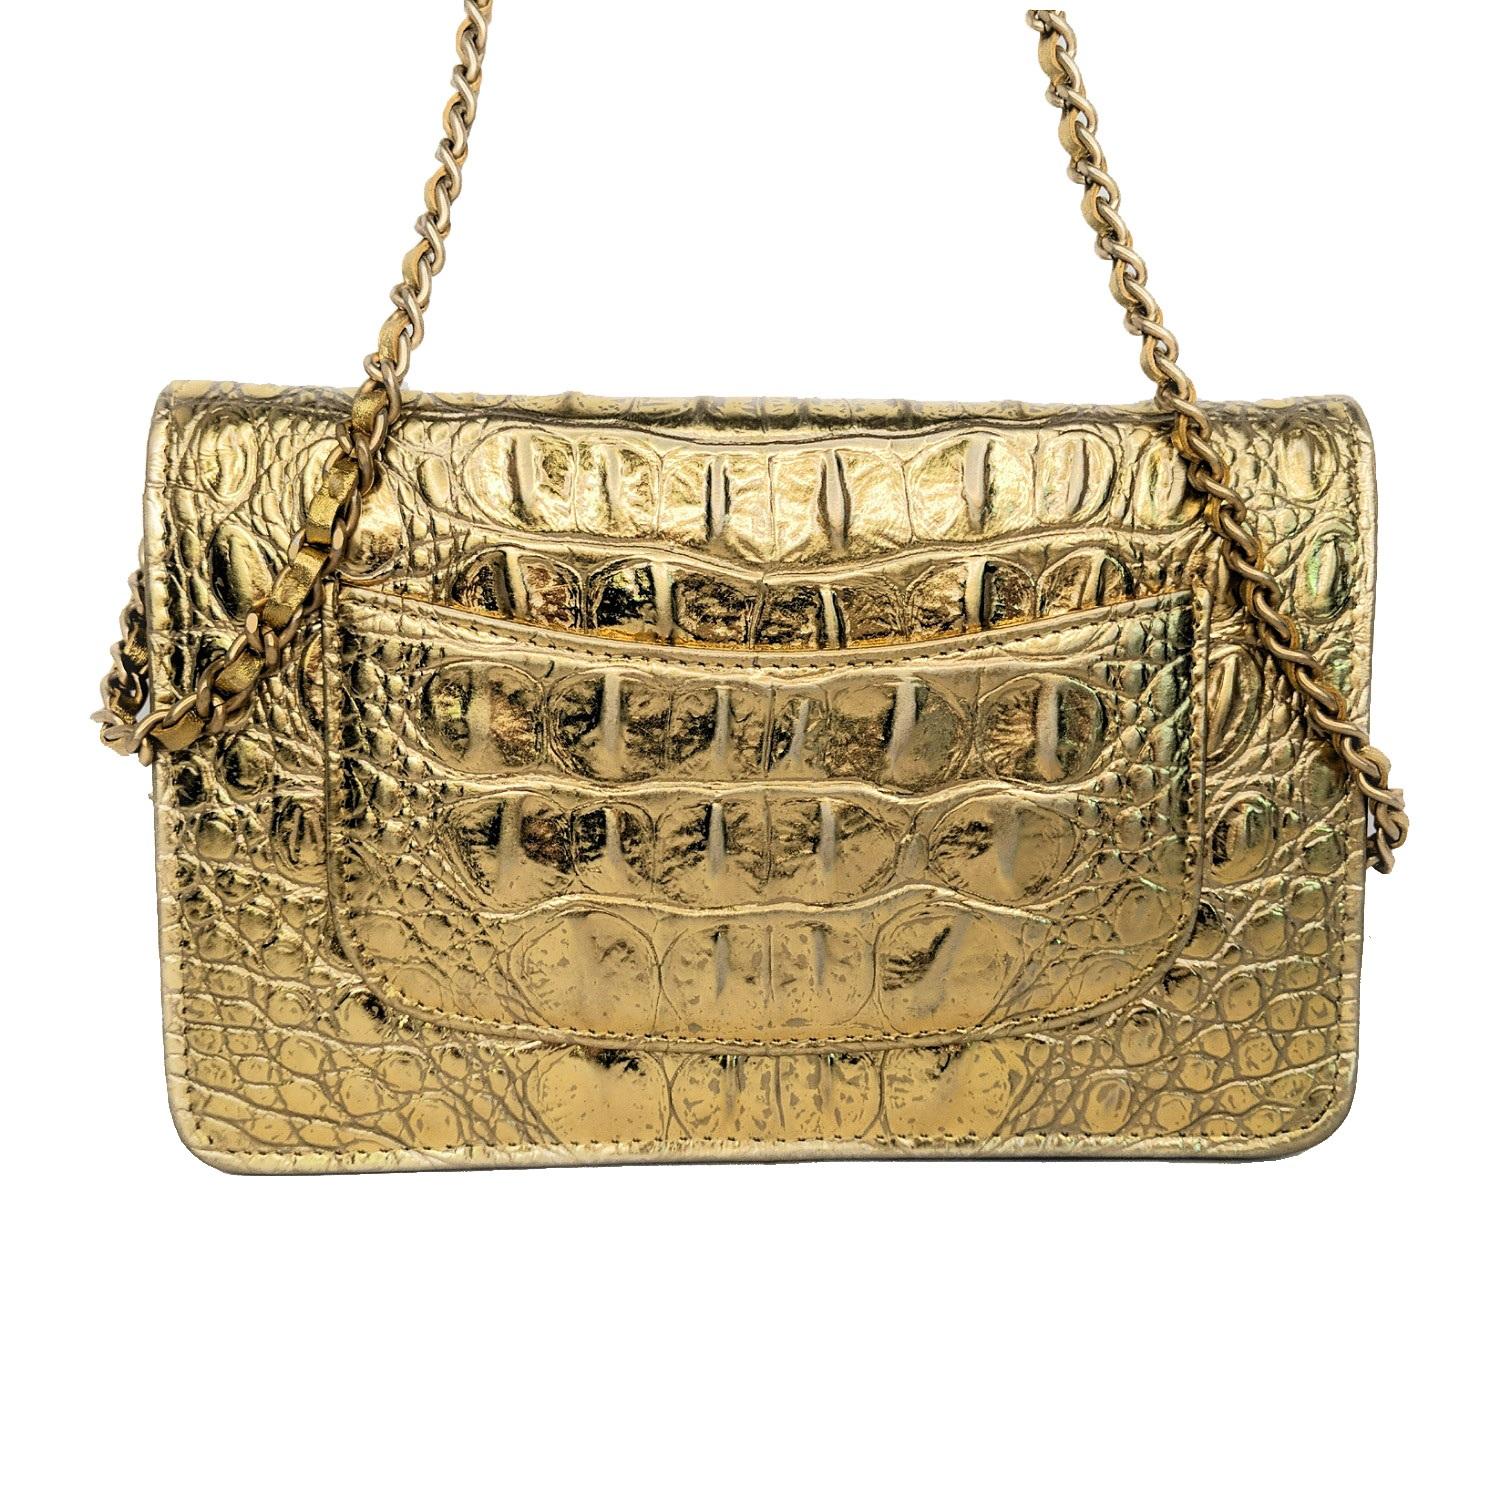 This stylish wallet on a chain is crafted of luxurious metallic embossed calfskin leather in gold. This shoulder bag features an extra long aged gold chain link leather threaded shoulder strap and a front faux aged gold Chanel CC. This unsnaps to a